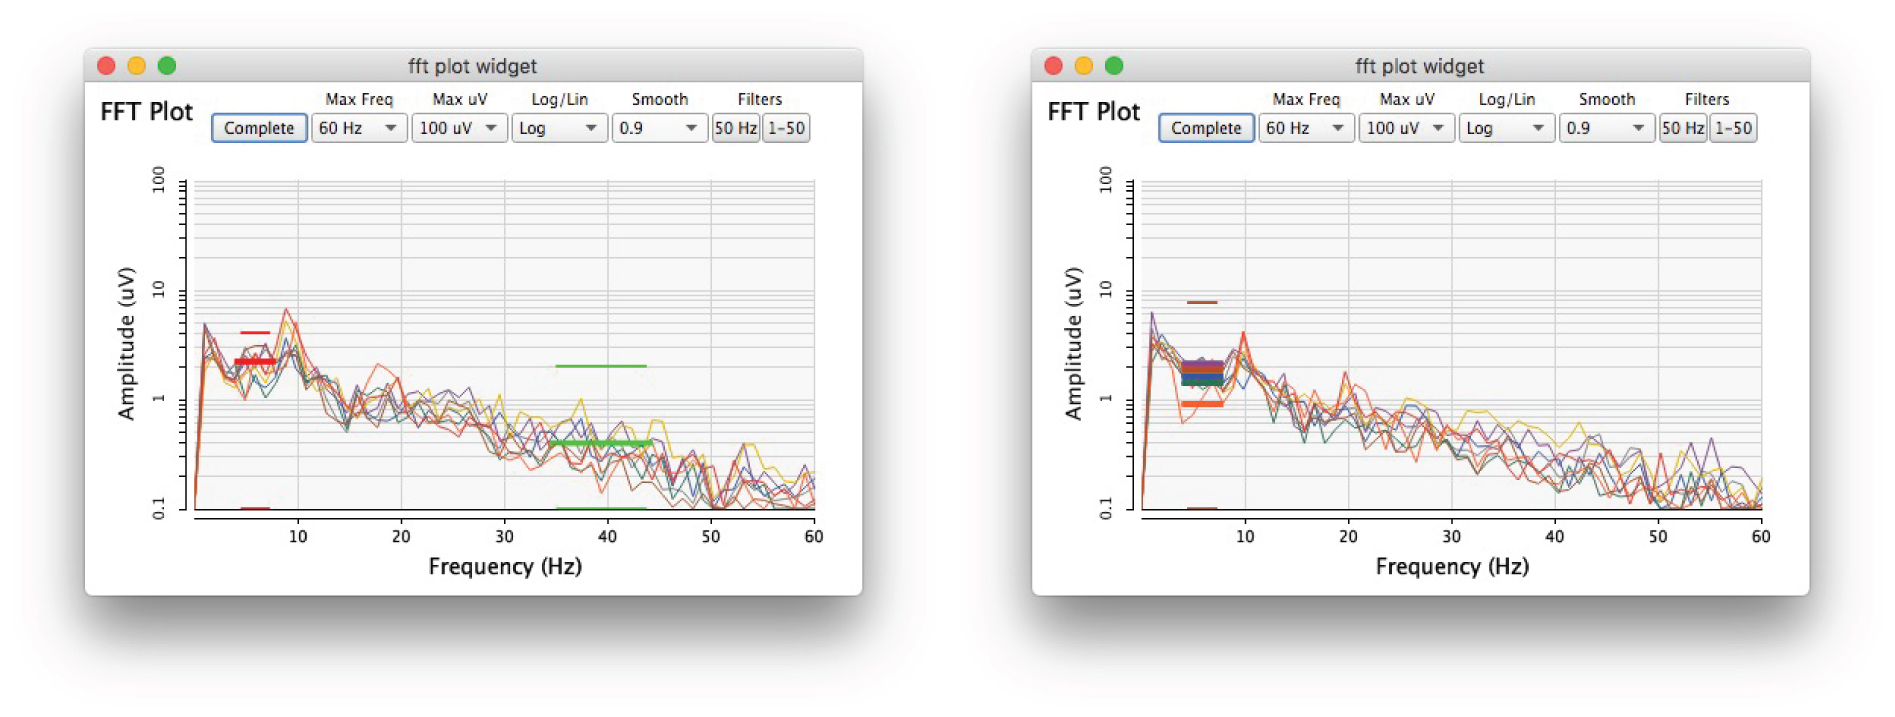 FFT plot of the OpenBCI-SuperCollider Interface showing theta and gamma energy medians (left) with neurofeedback thresholds for theta at 4 uV (top slim red line) and threshold for gamma at 2 uV (top slim green line). Eight theta medians extracted (right) with a threshold for one at 7.5 uV (top brown line).